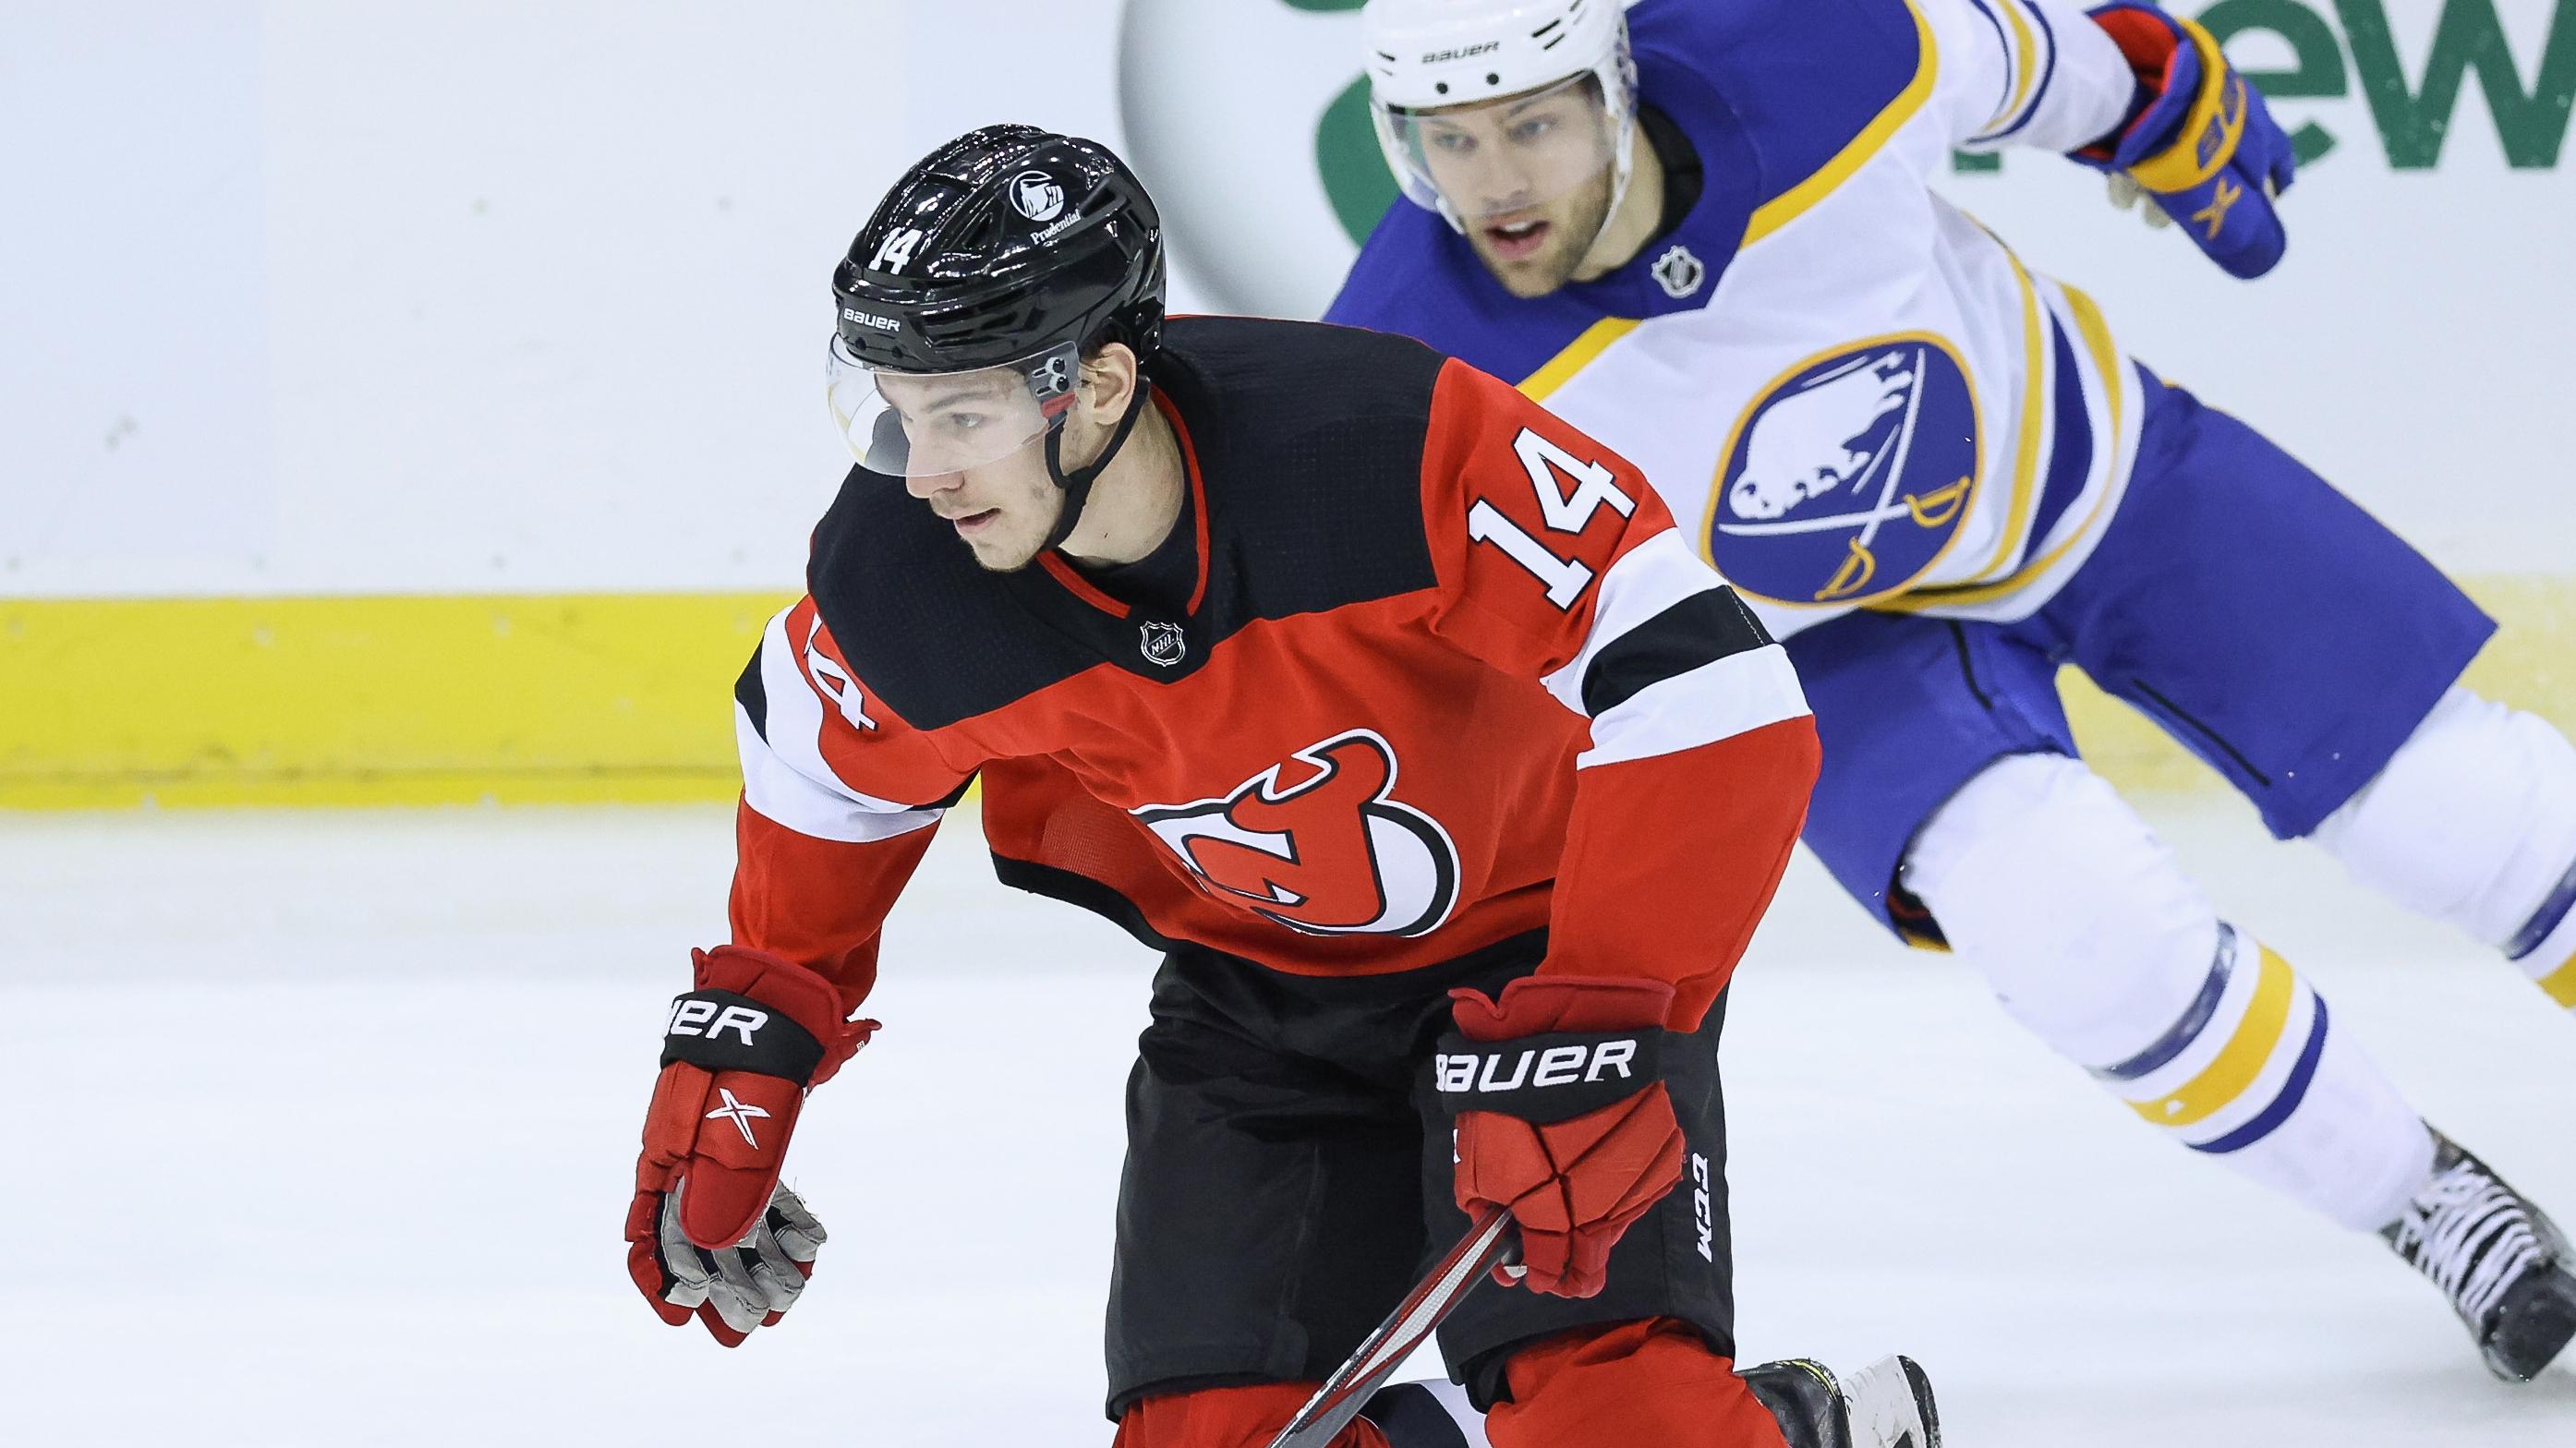 New Jersey Devils right wing Nathan Bastian (14) skates the puck up ice against Buffalo Sabres left wing Taylor Hall (4) during the first period at Prudential Center. / Vincent Carchietta-USA TODAY Sports